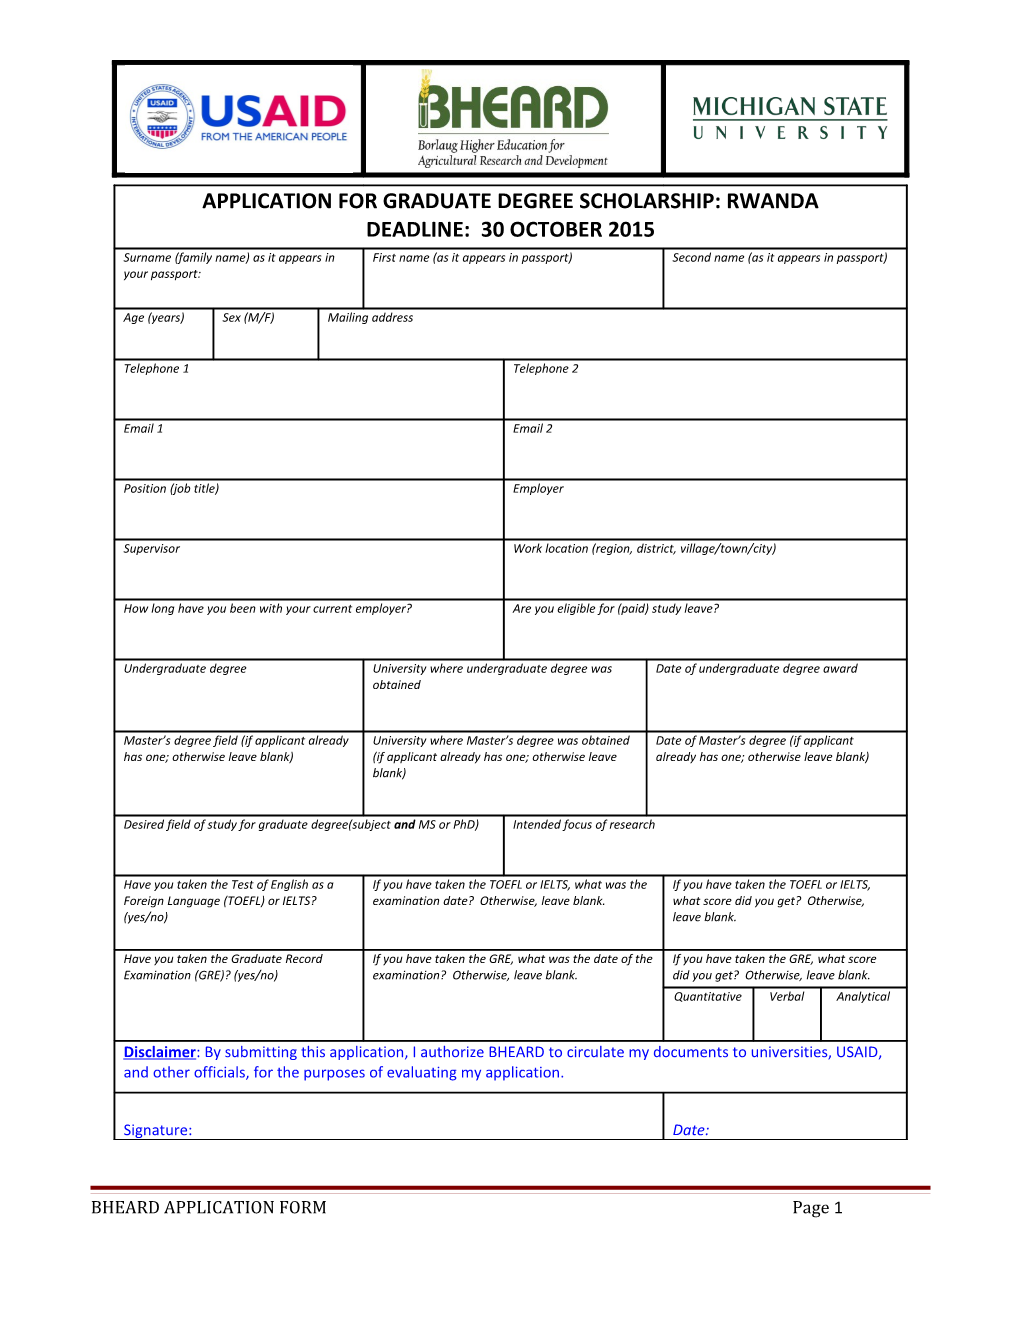 Candidate Documents Required